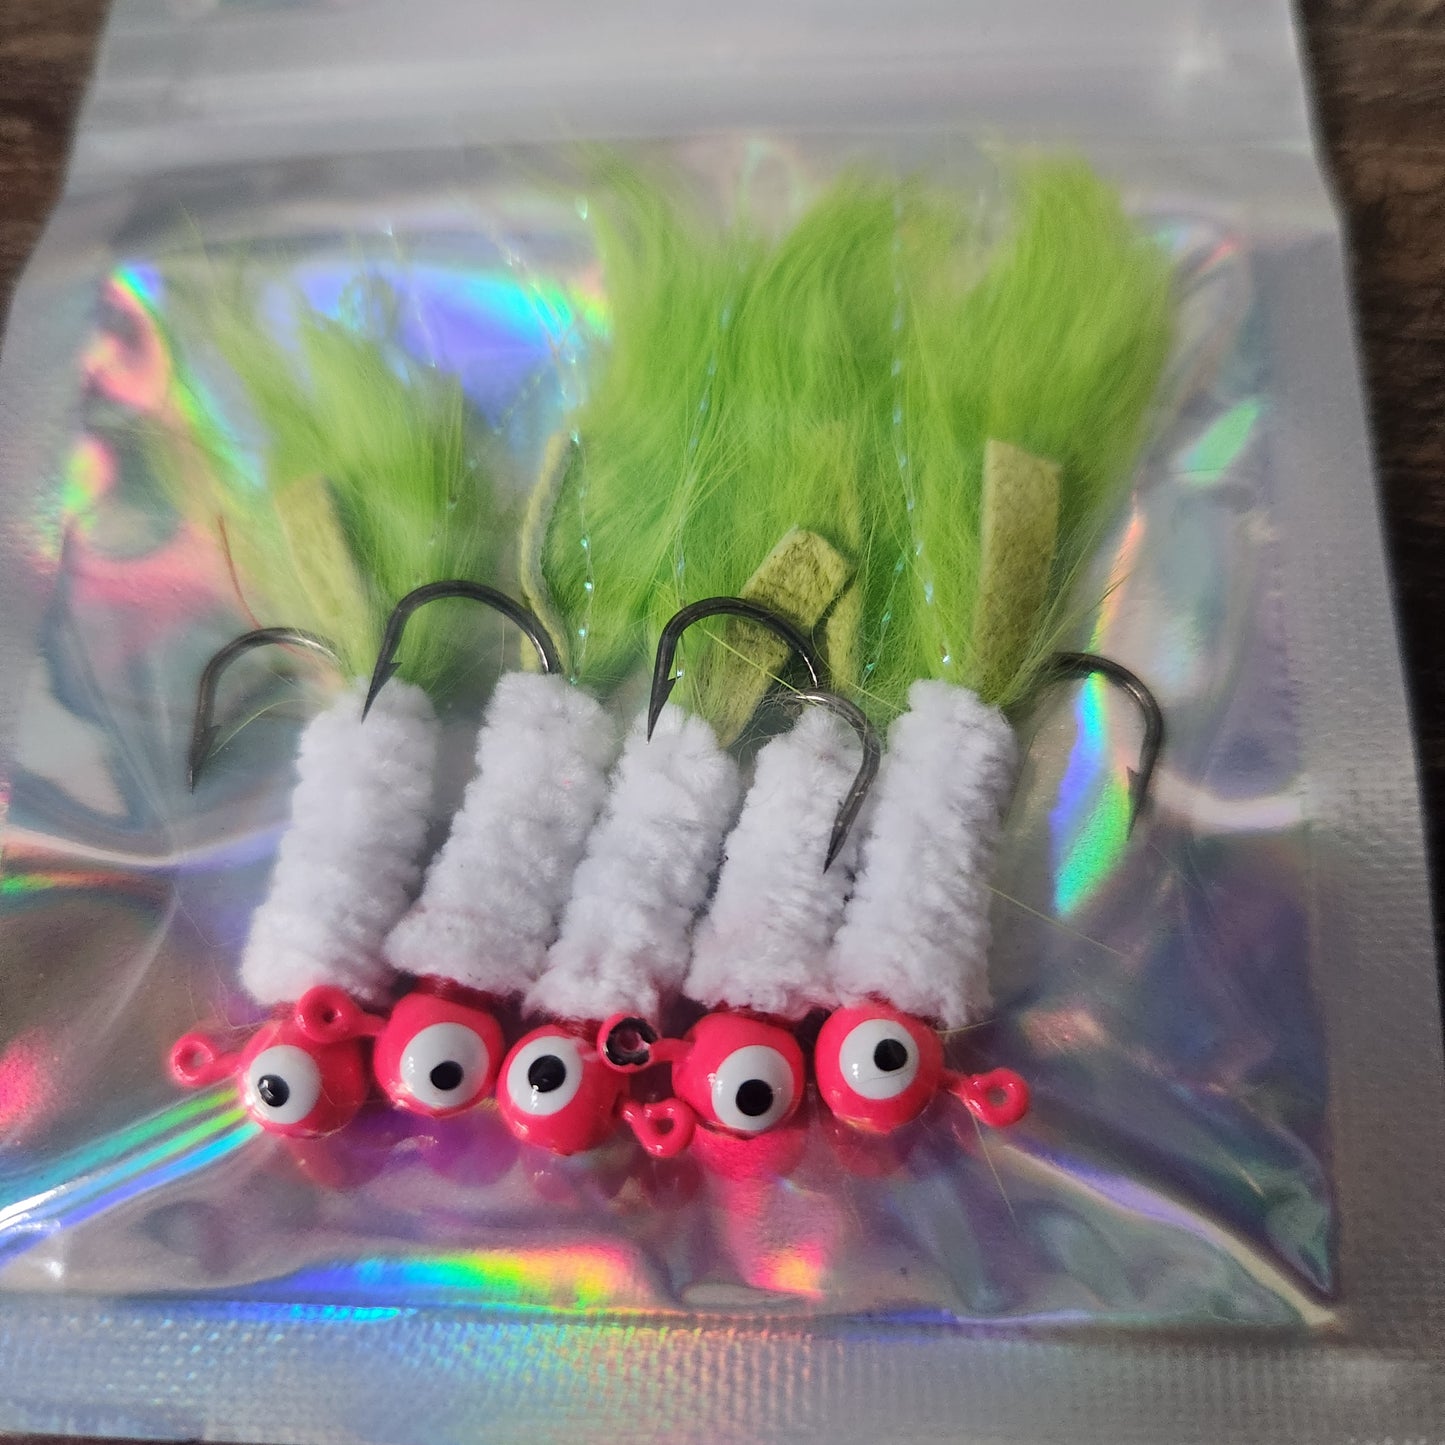 "Melon Head" 5 pack of Crappie Jigs 1/16 and 1/8 ounces